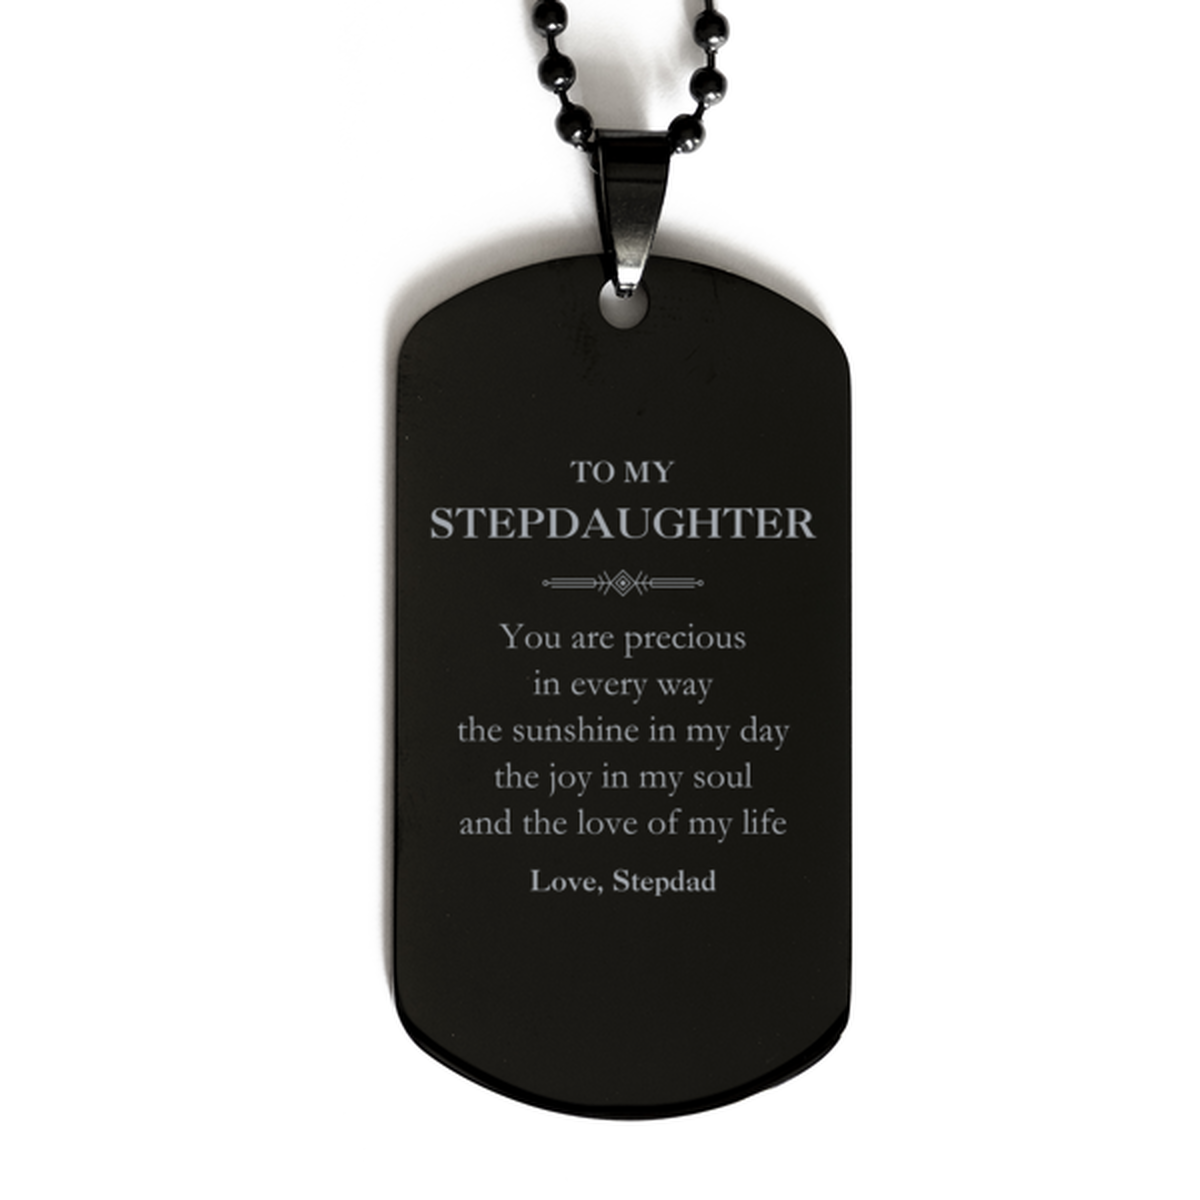 Graduation Gifts for Stepdaughter Black Dog Tag Present from Stepdad, Christmas Stepdaughter Birthday Gifts Stepdaughter You are precious in every way the sunshine in my day. Love, Stepdad